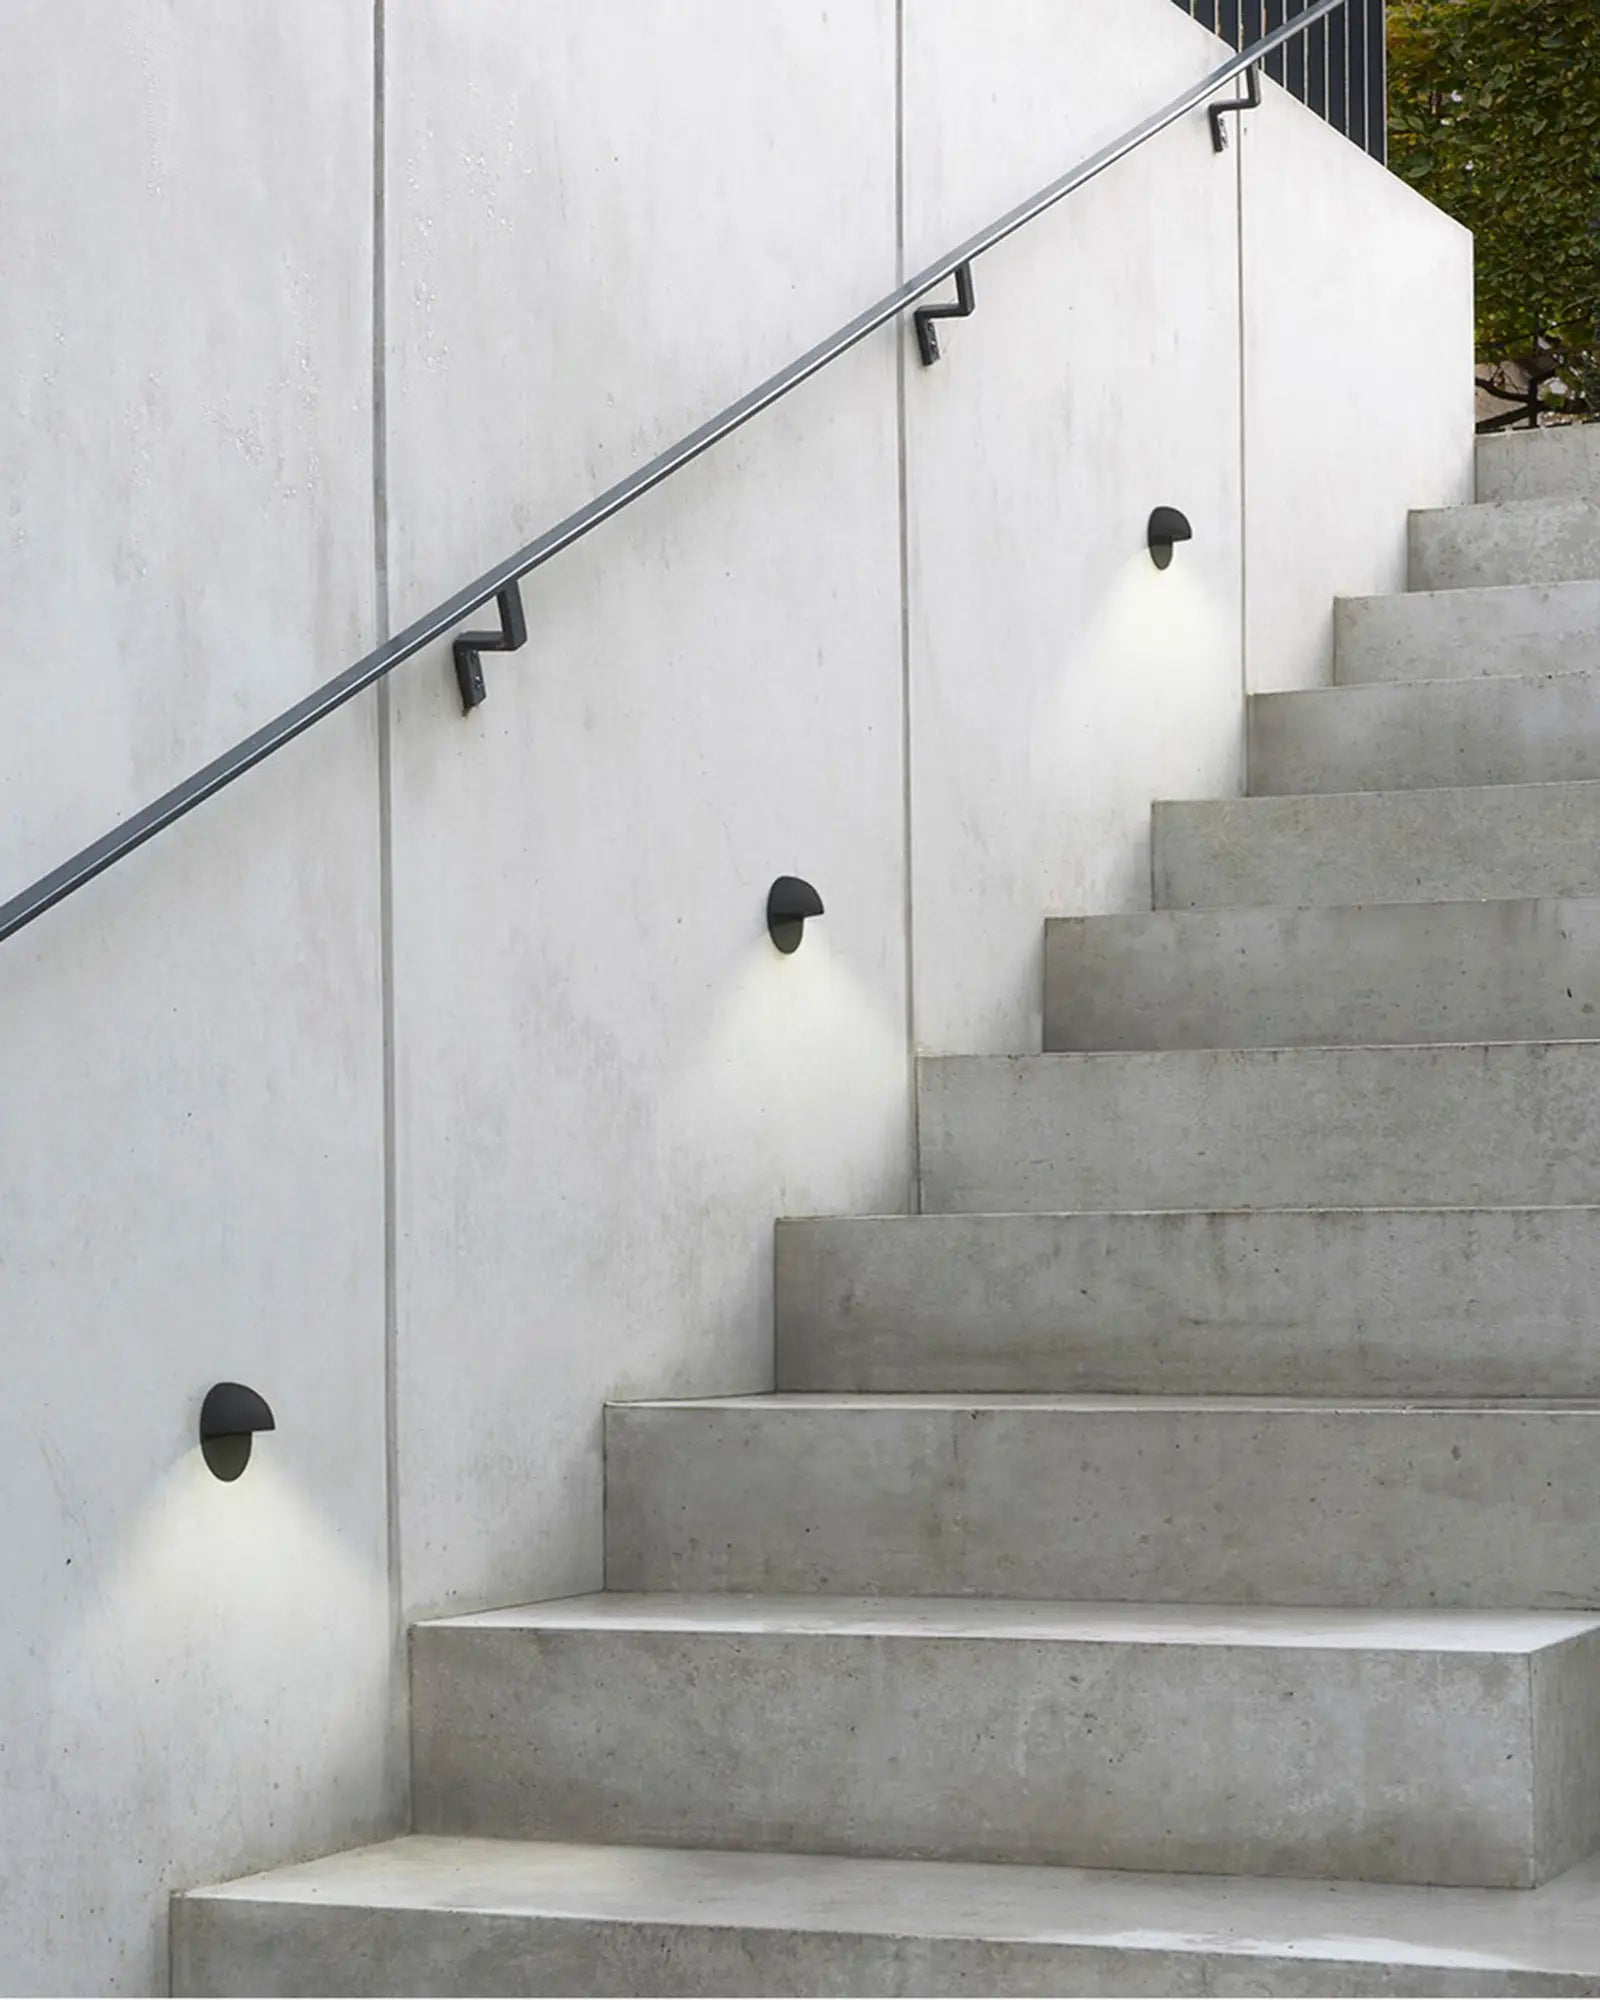 Tivola outdoor minimalistic wall light on a wall of a staircase